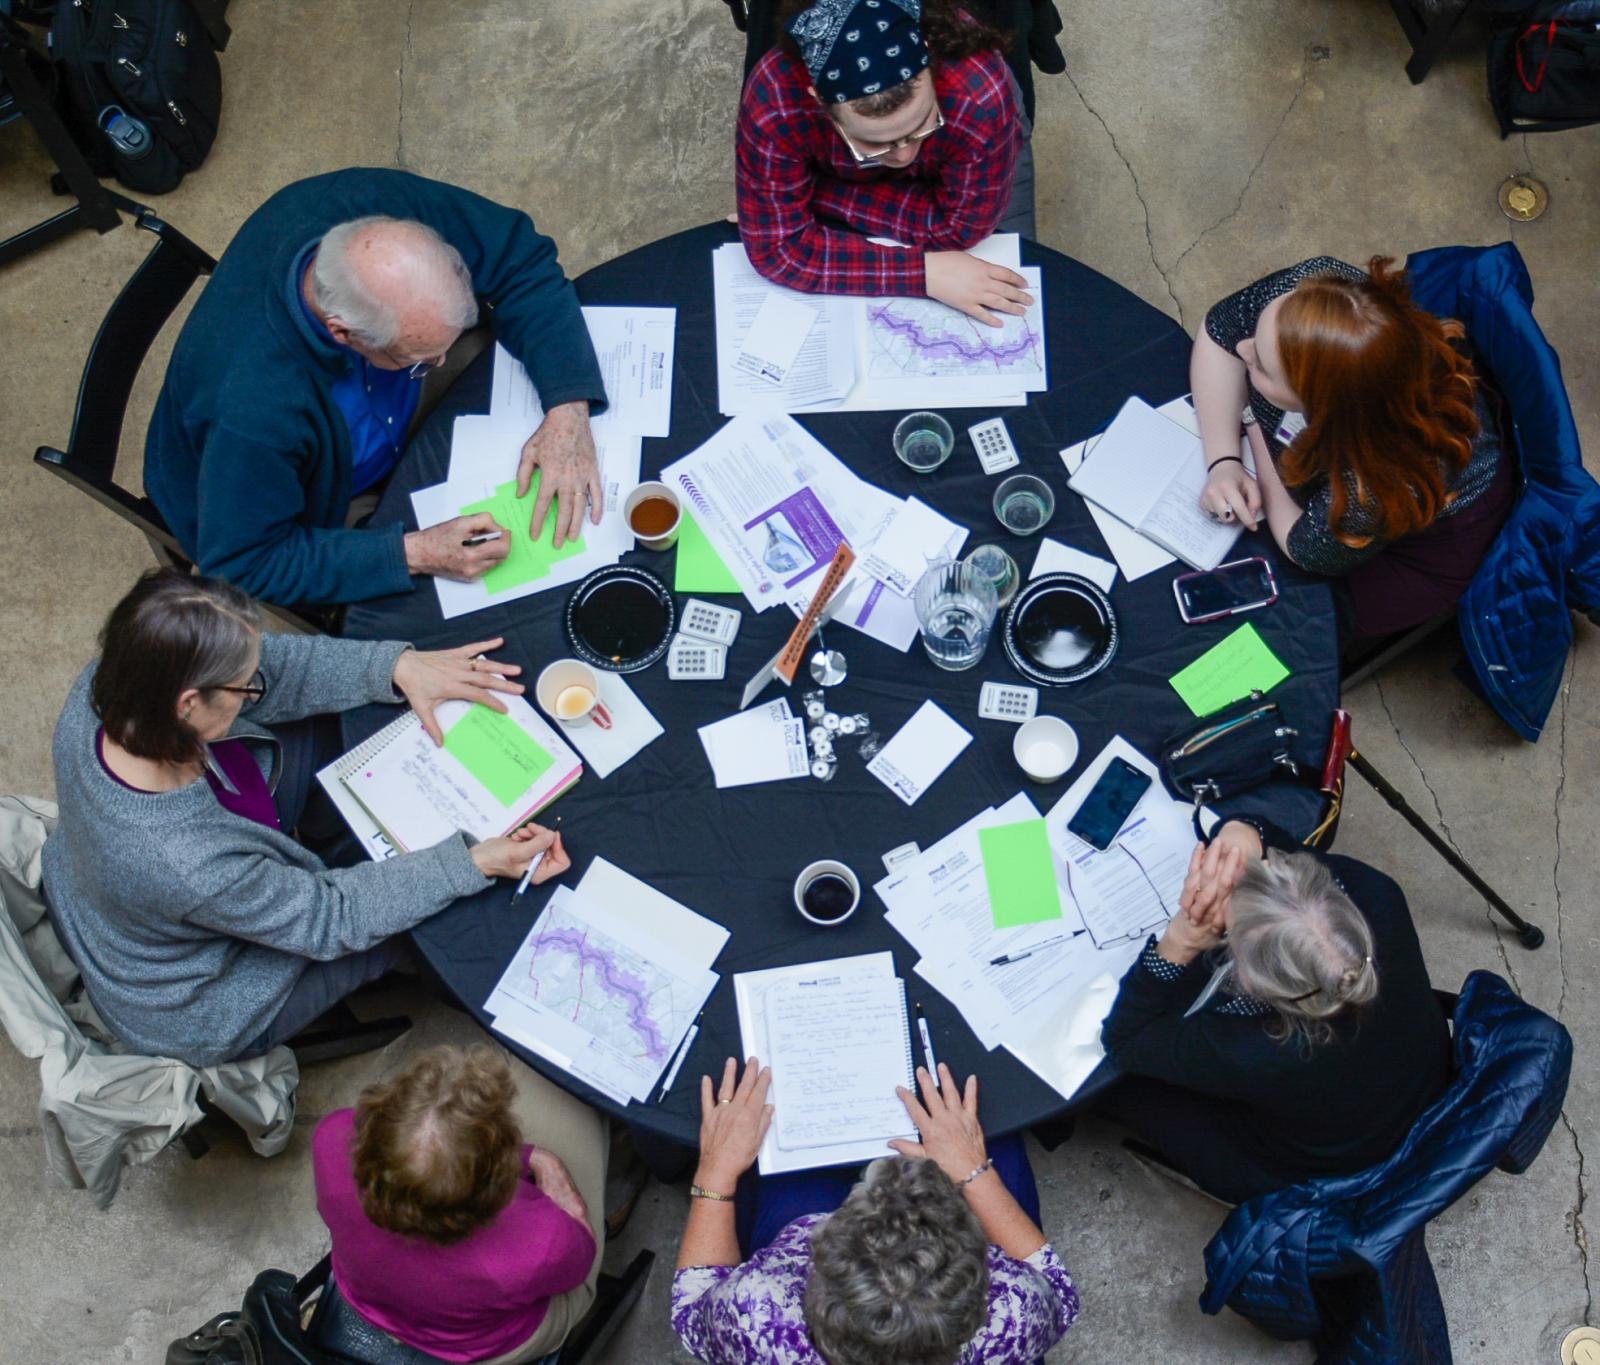 View from above of people at a table during the National Center for Smart Growth (NCSG), Purple Line Corridor Coalition (PLCC) event in March 2019.